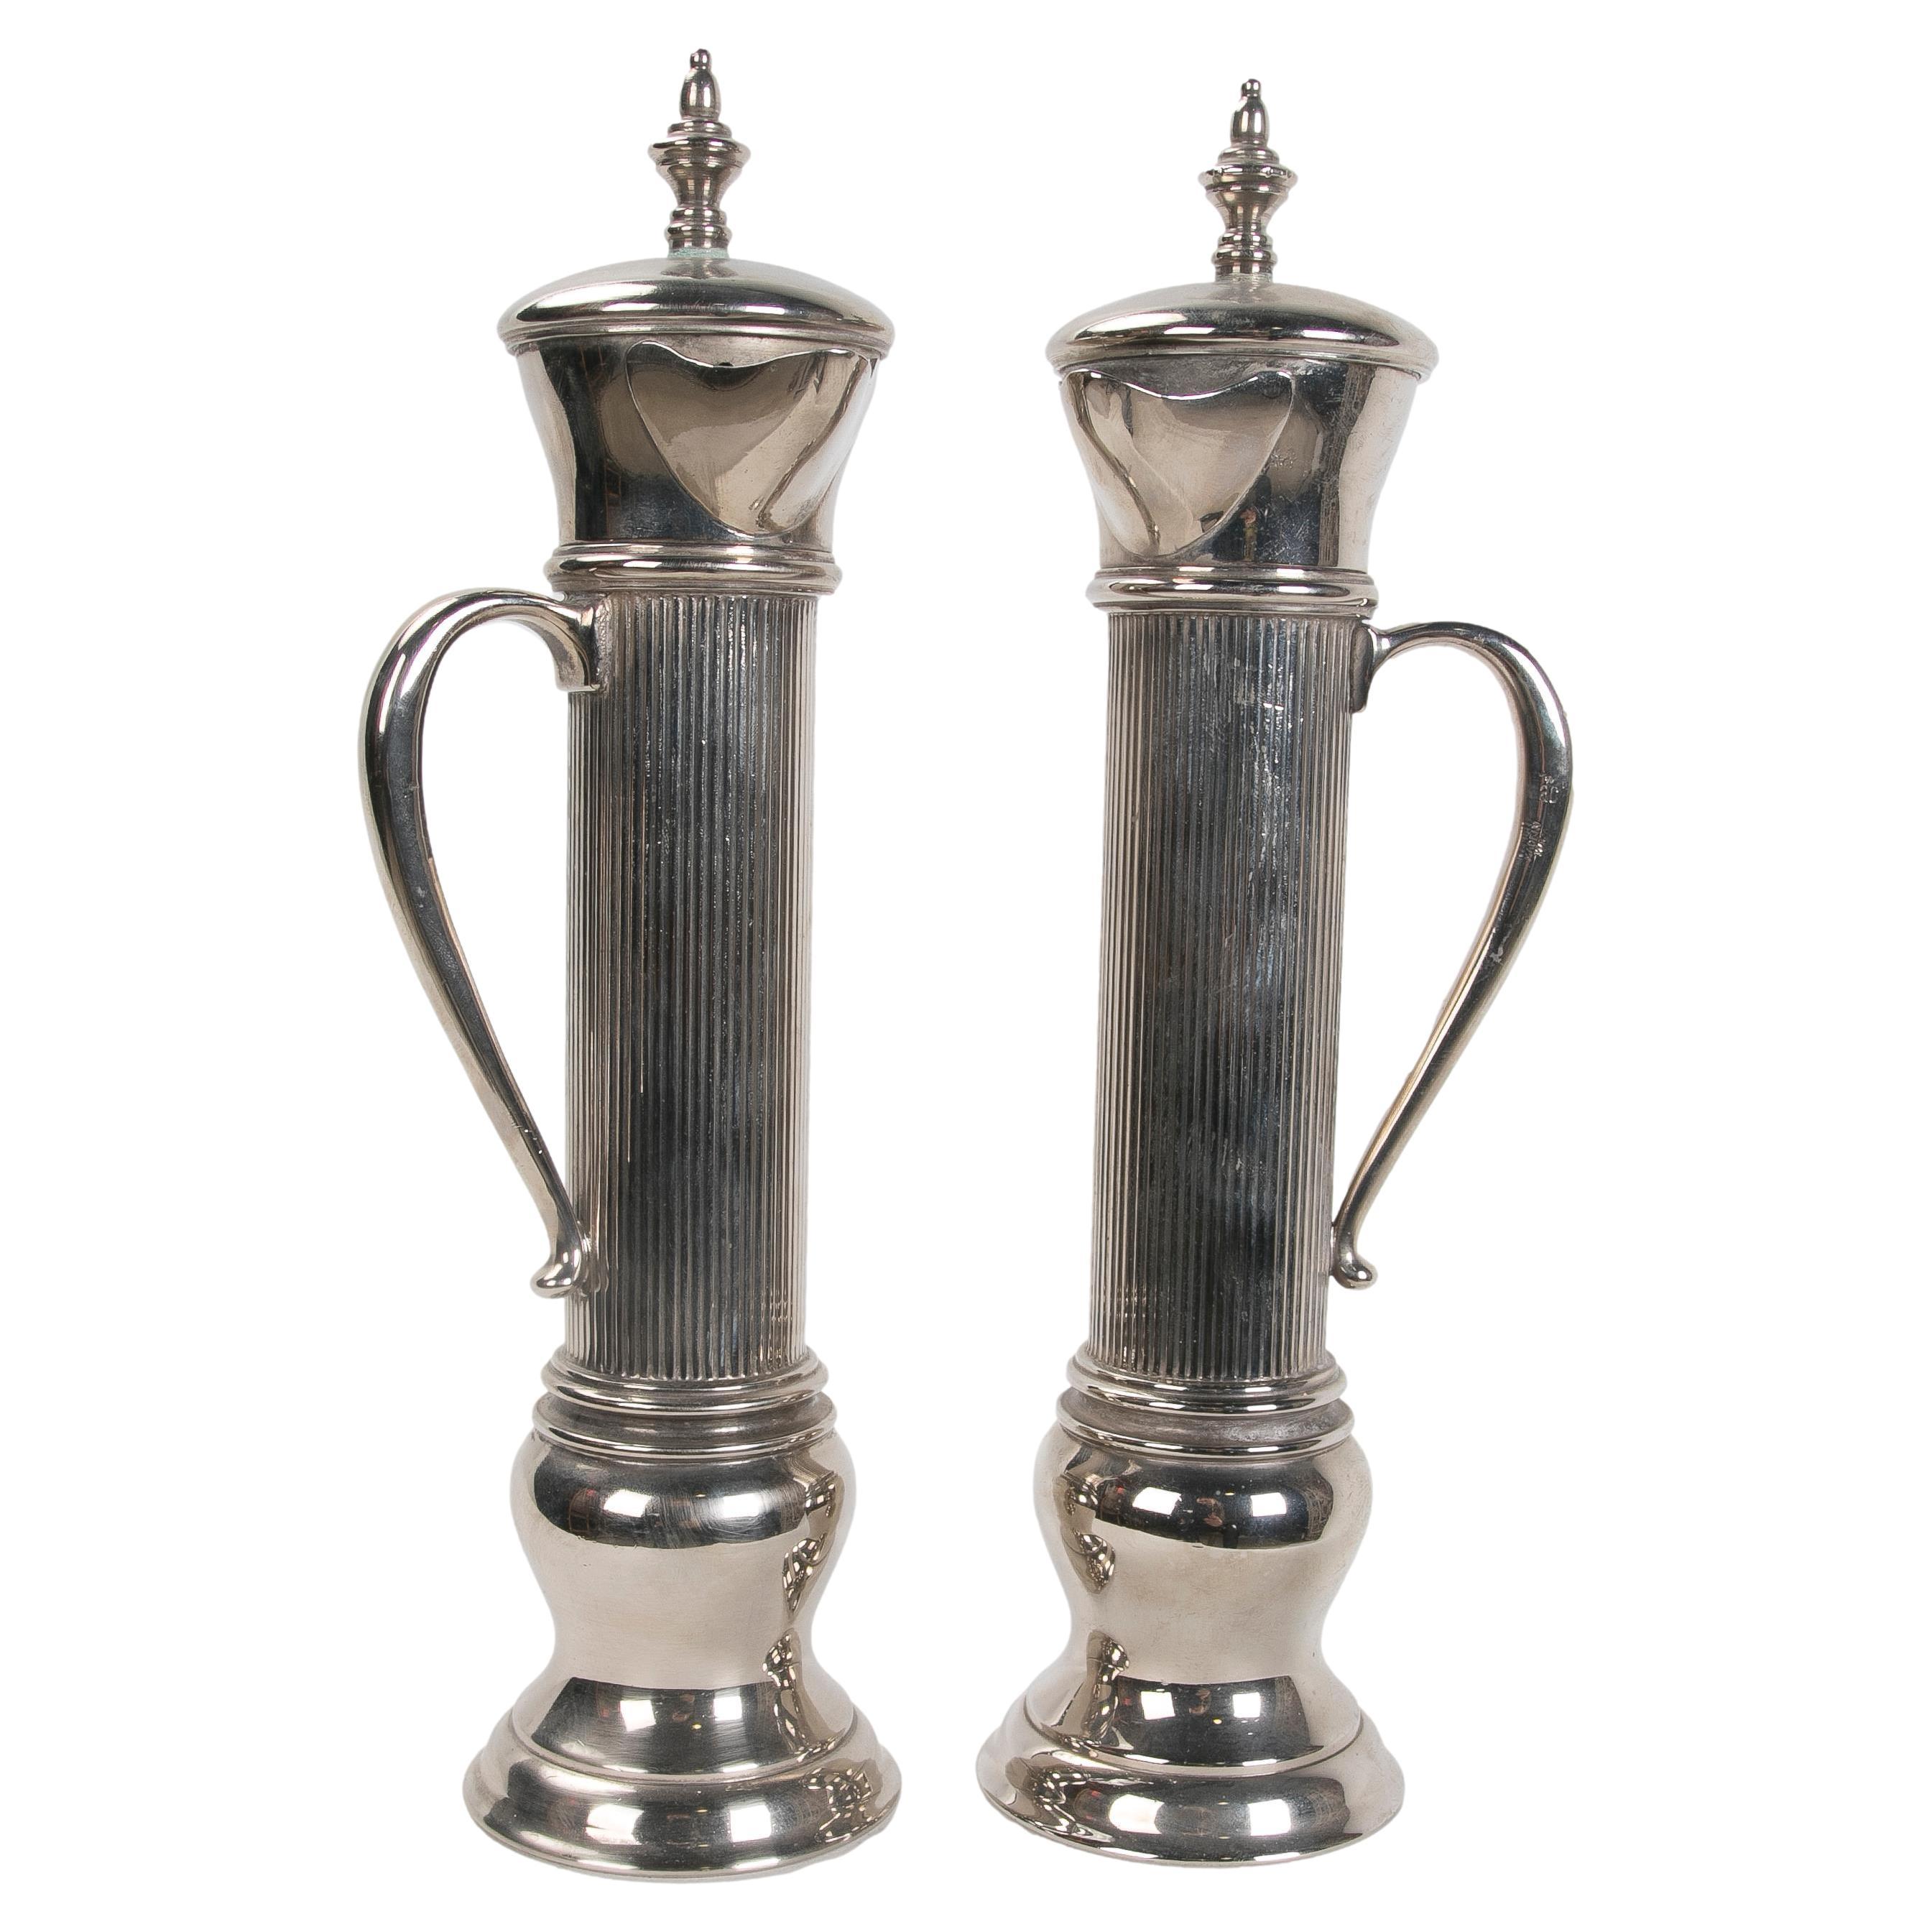 1980s Italian Pair of Silver Plated Metal Pepper Pots